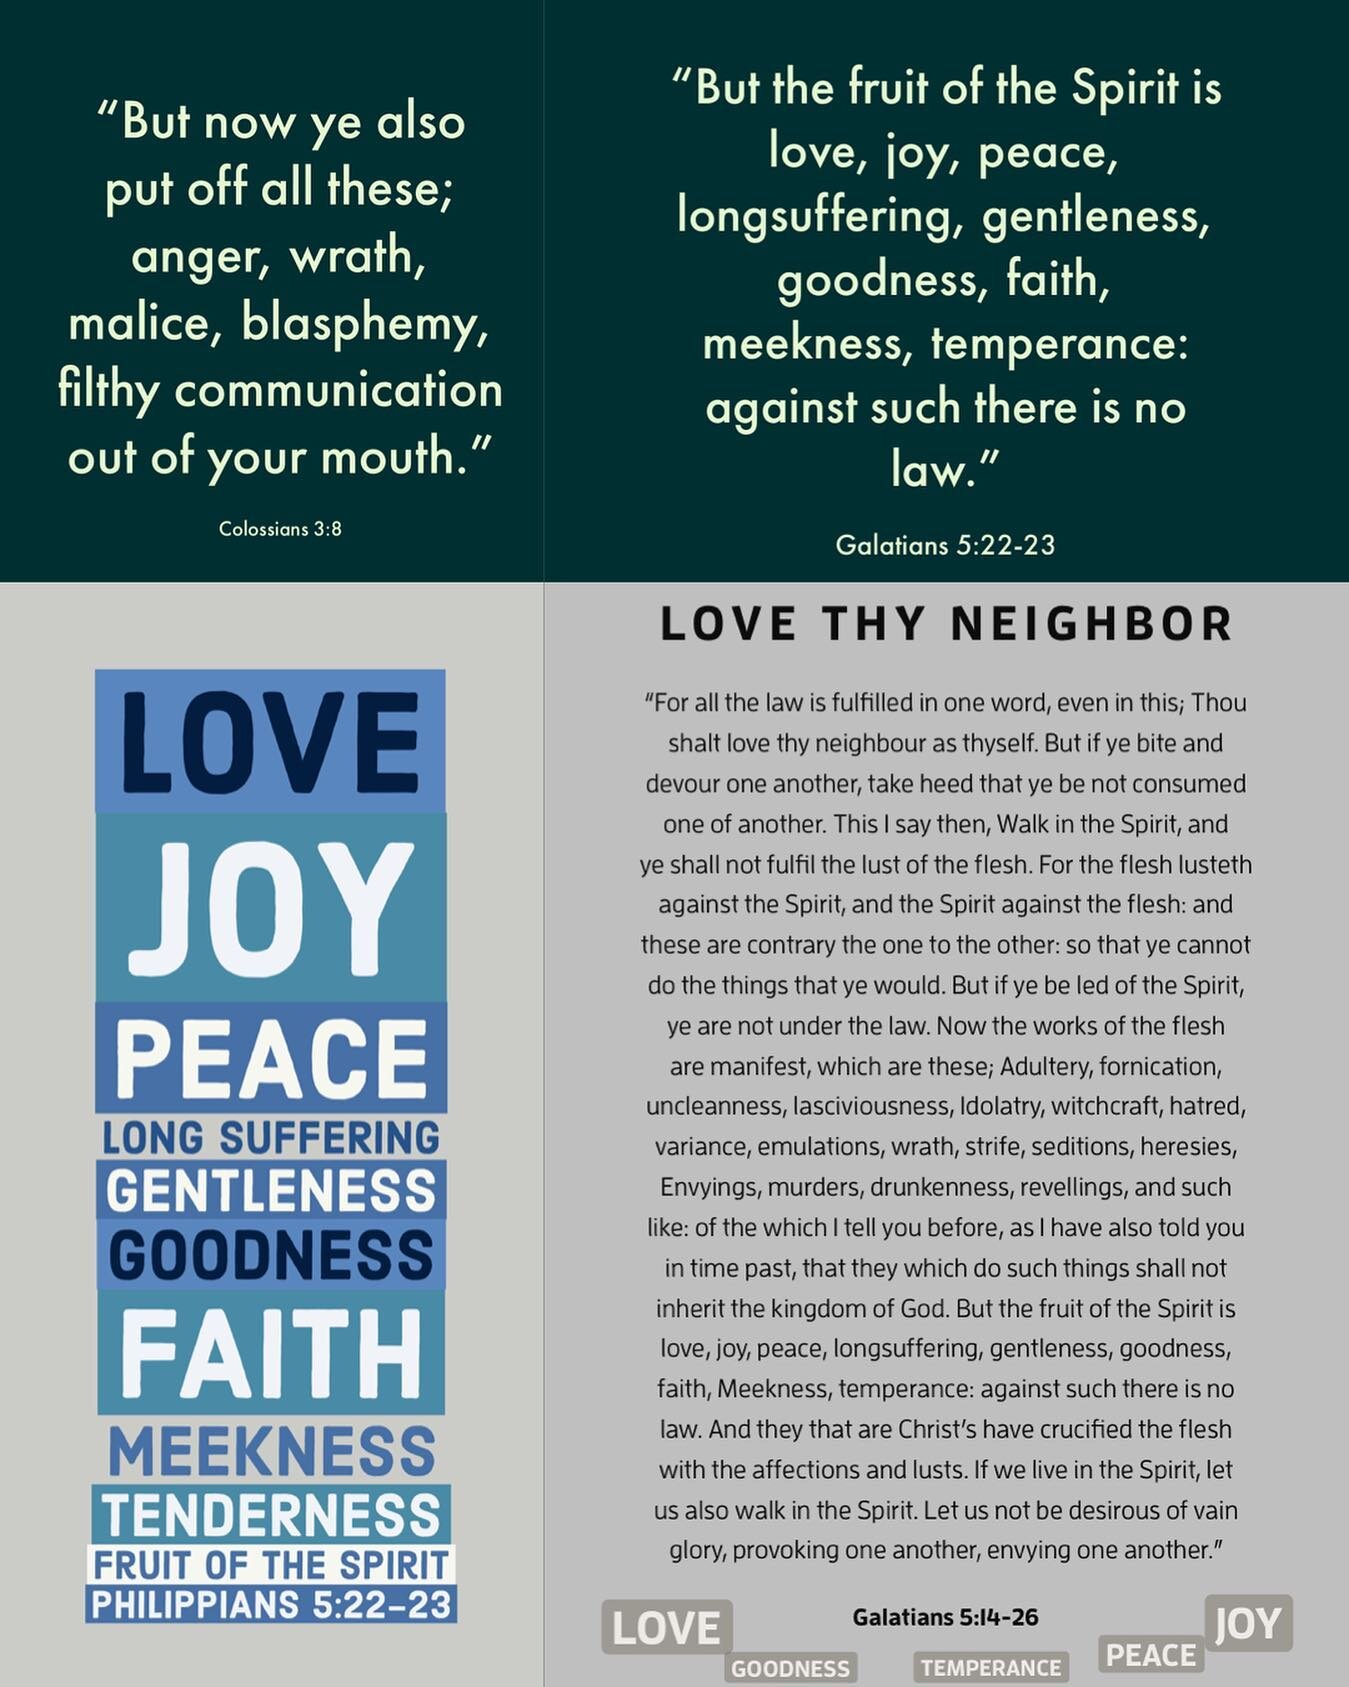 &ldquo;Love Thy Neighbor&rdquo; 
As we&rsquo;ve many times and shared with numerous people in our lives, we are believers in the Bible and followers of Jesus Christ. While peaceful protests are fine, unlawful violence and destruction is unacceptable.